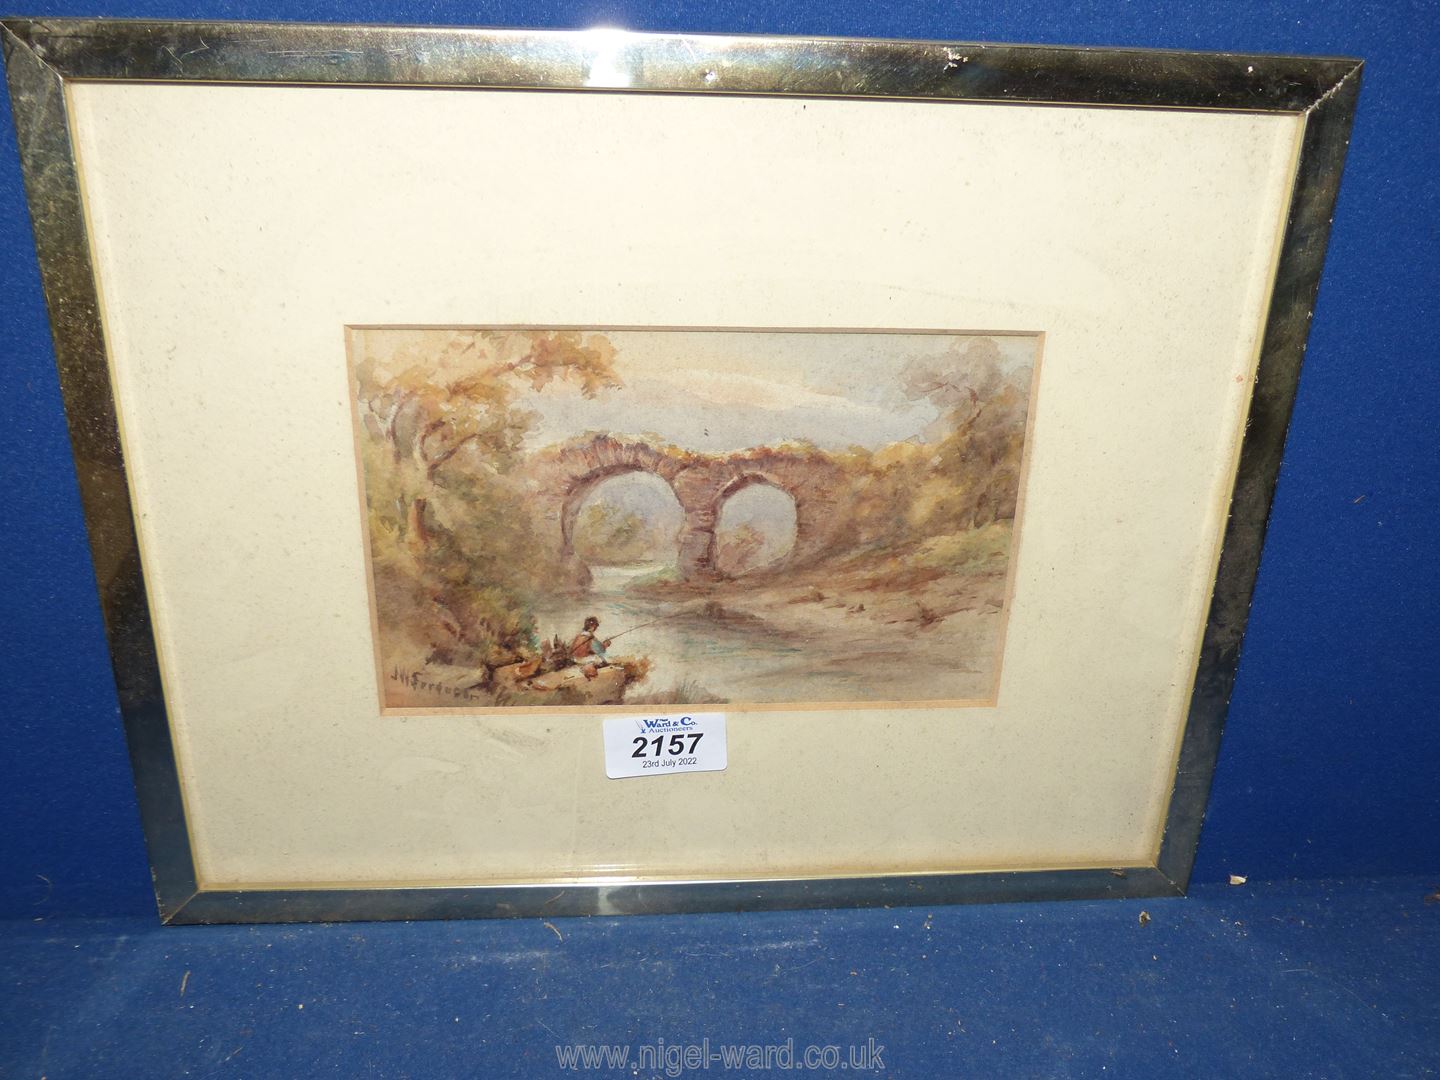 A small framed and mounted Watercolour depicting a Gentleman sat by river fishing near an old stone